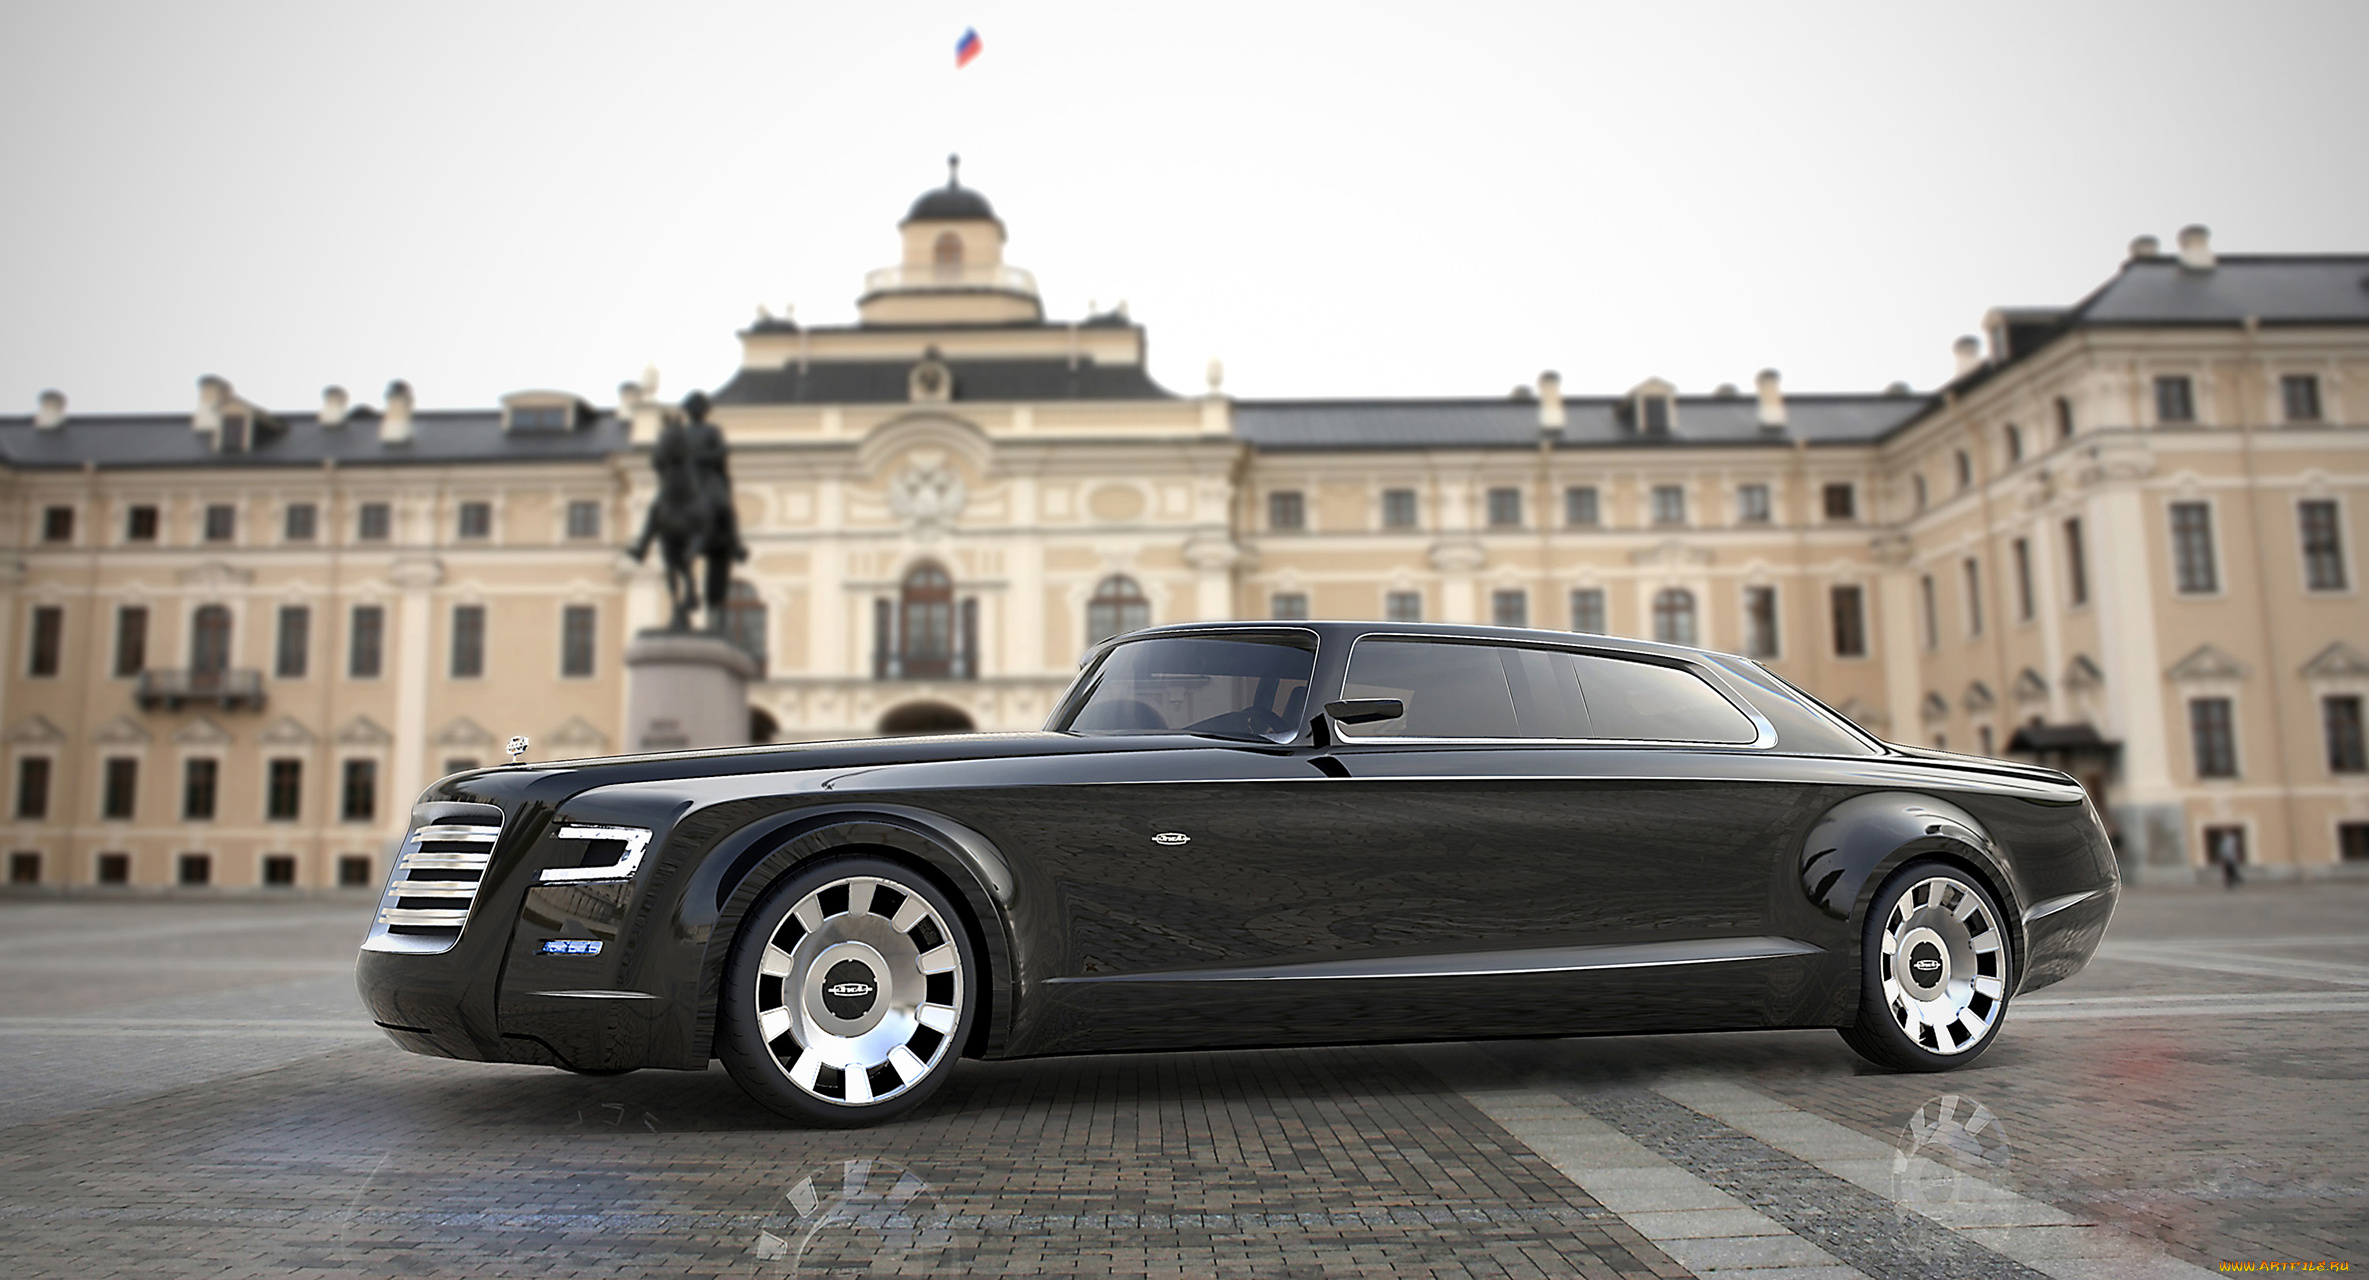 zil, presidential, limo, concept, автомобили, 3д, 3d, limo, concept, presidential, zil